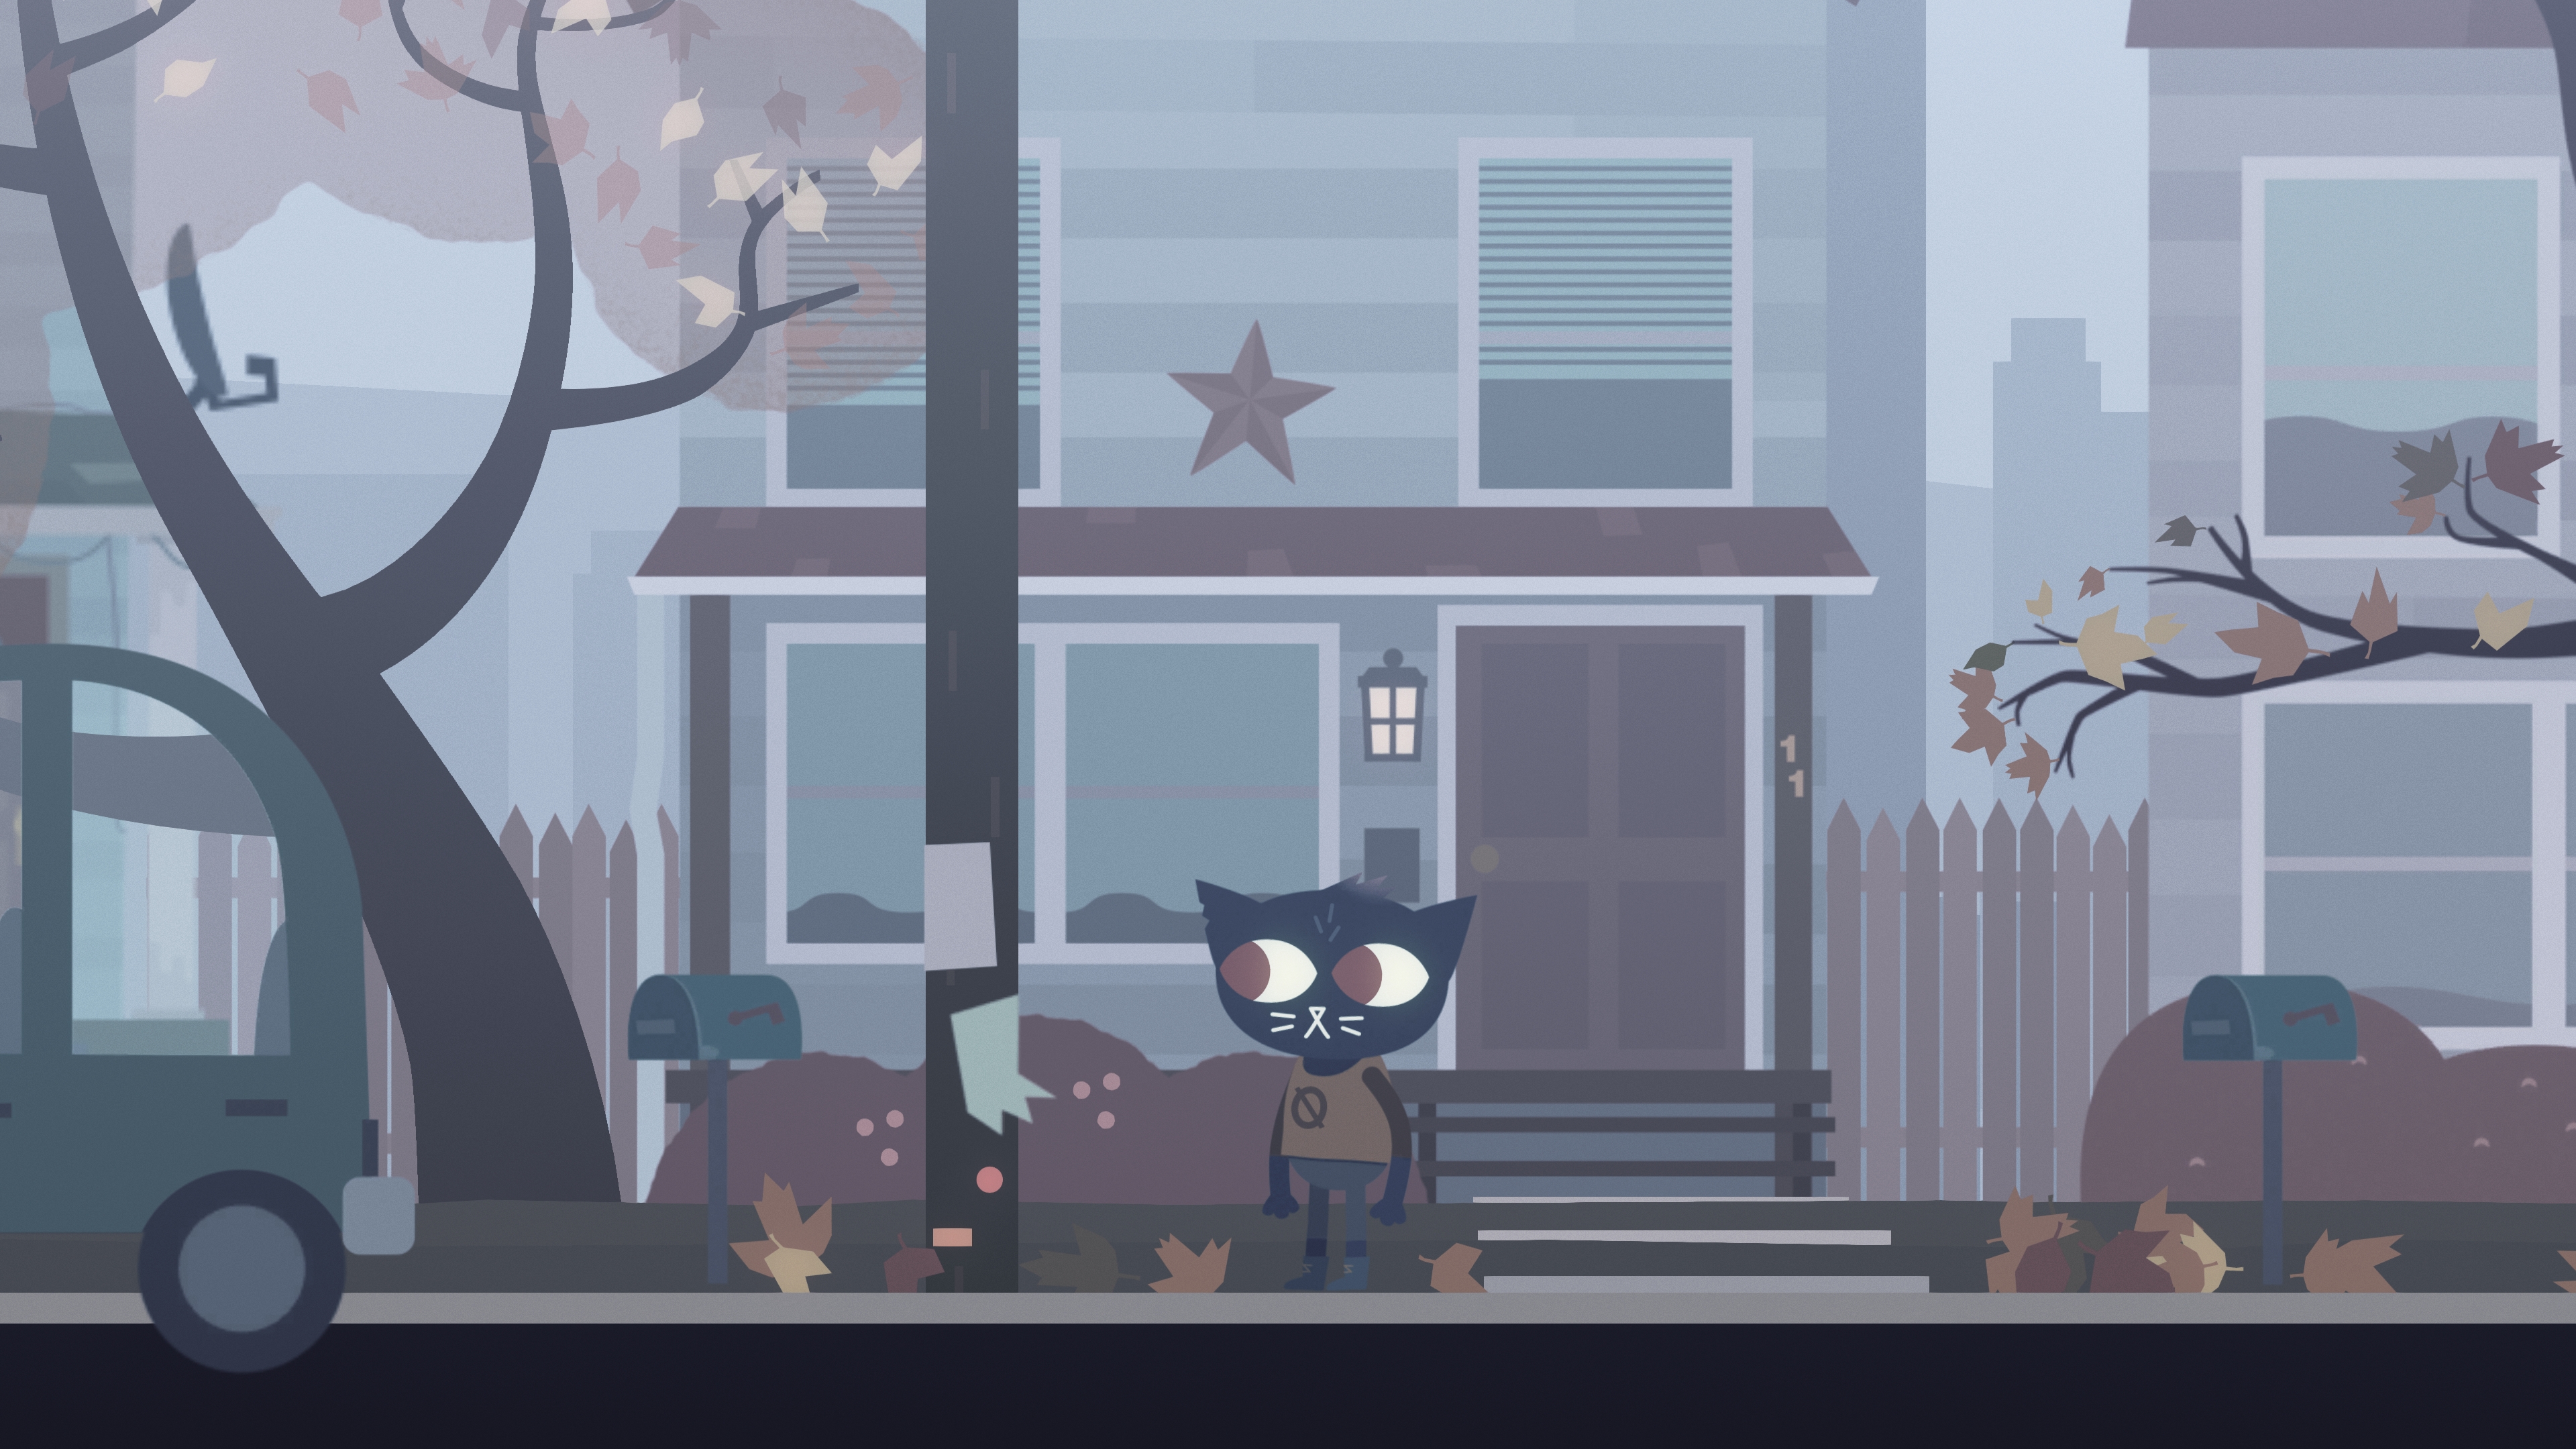 Night In The Woods 3840x2160